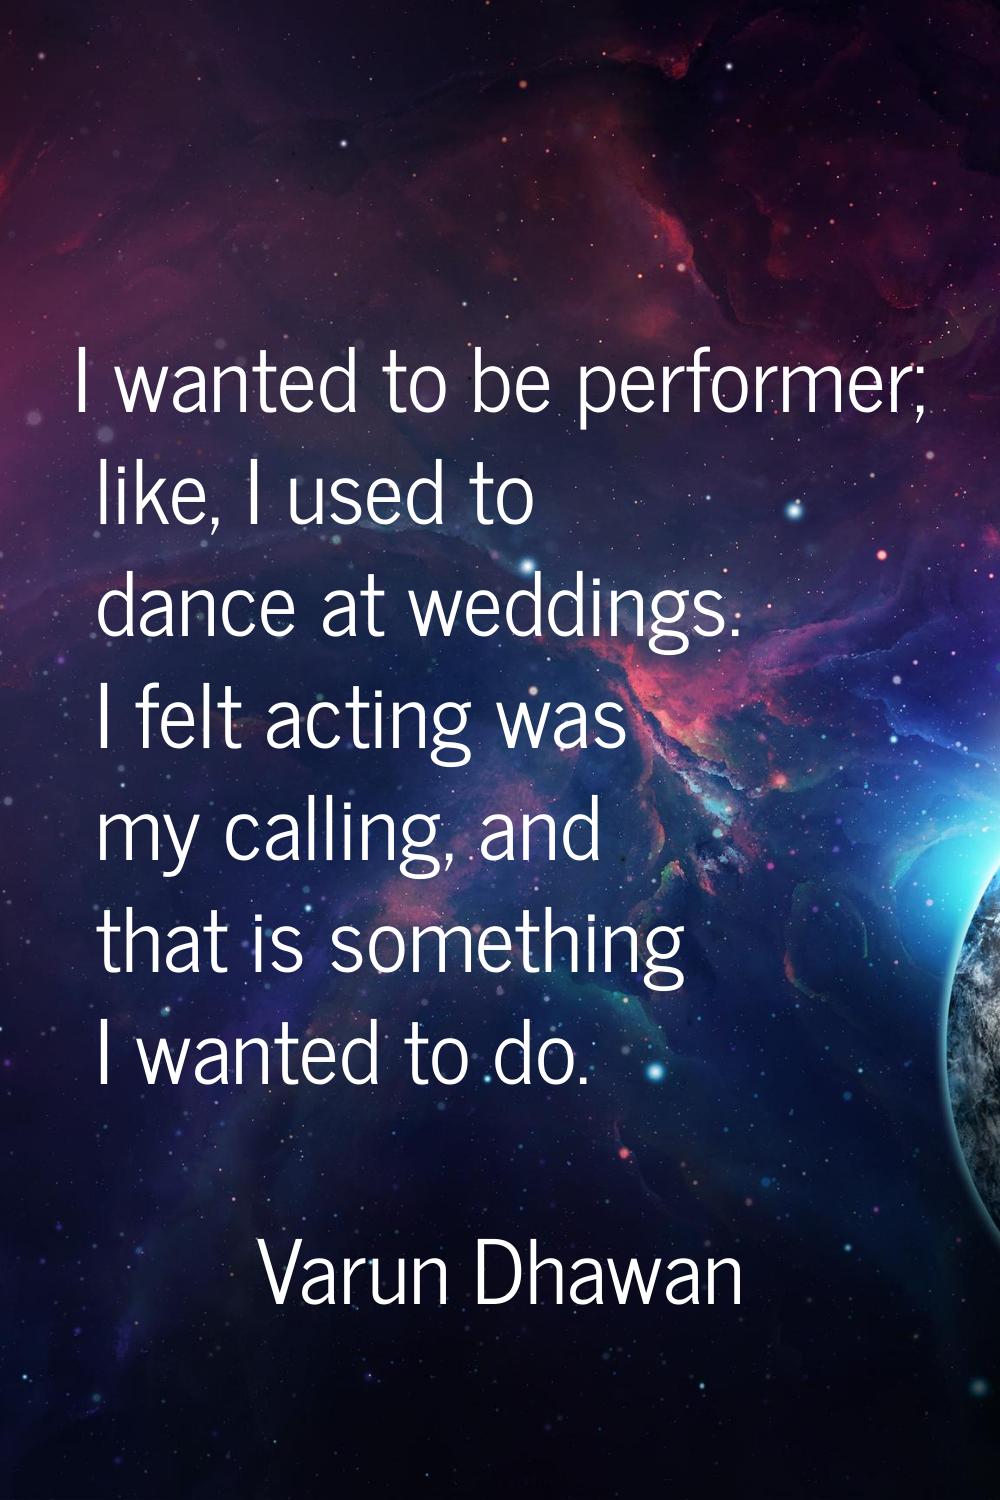 I wanted to be performer; like, I used to dance at weddings. I felt acting was my calling, and that